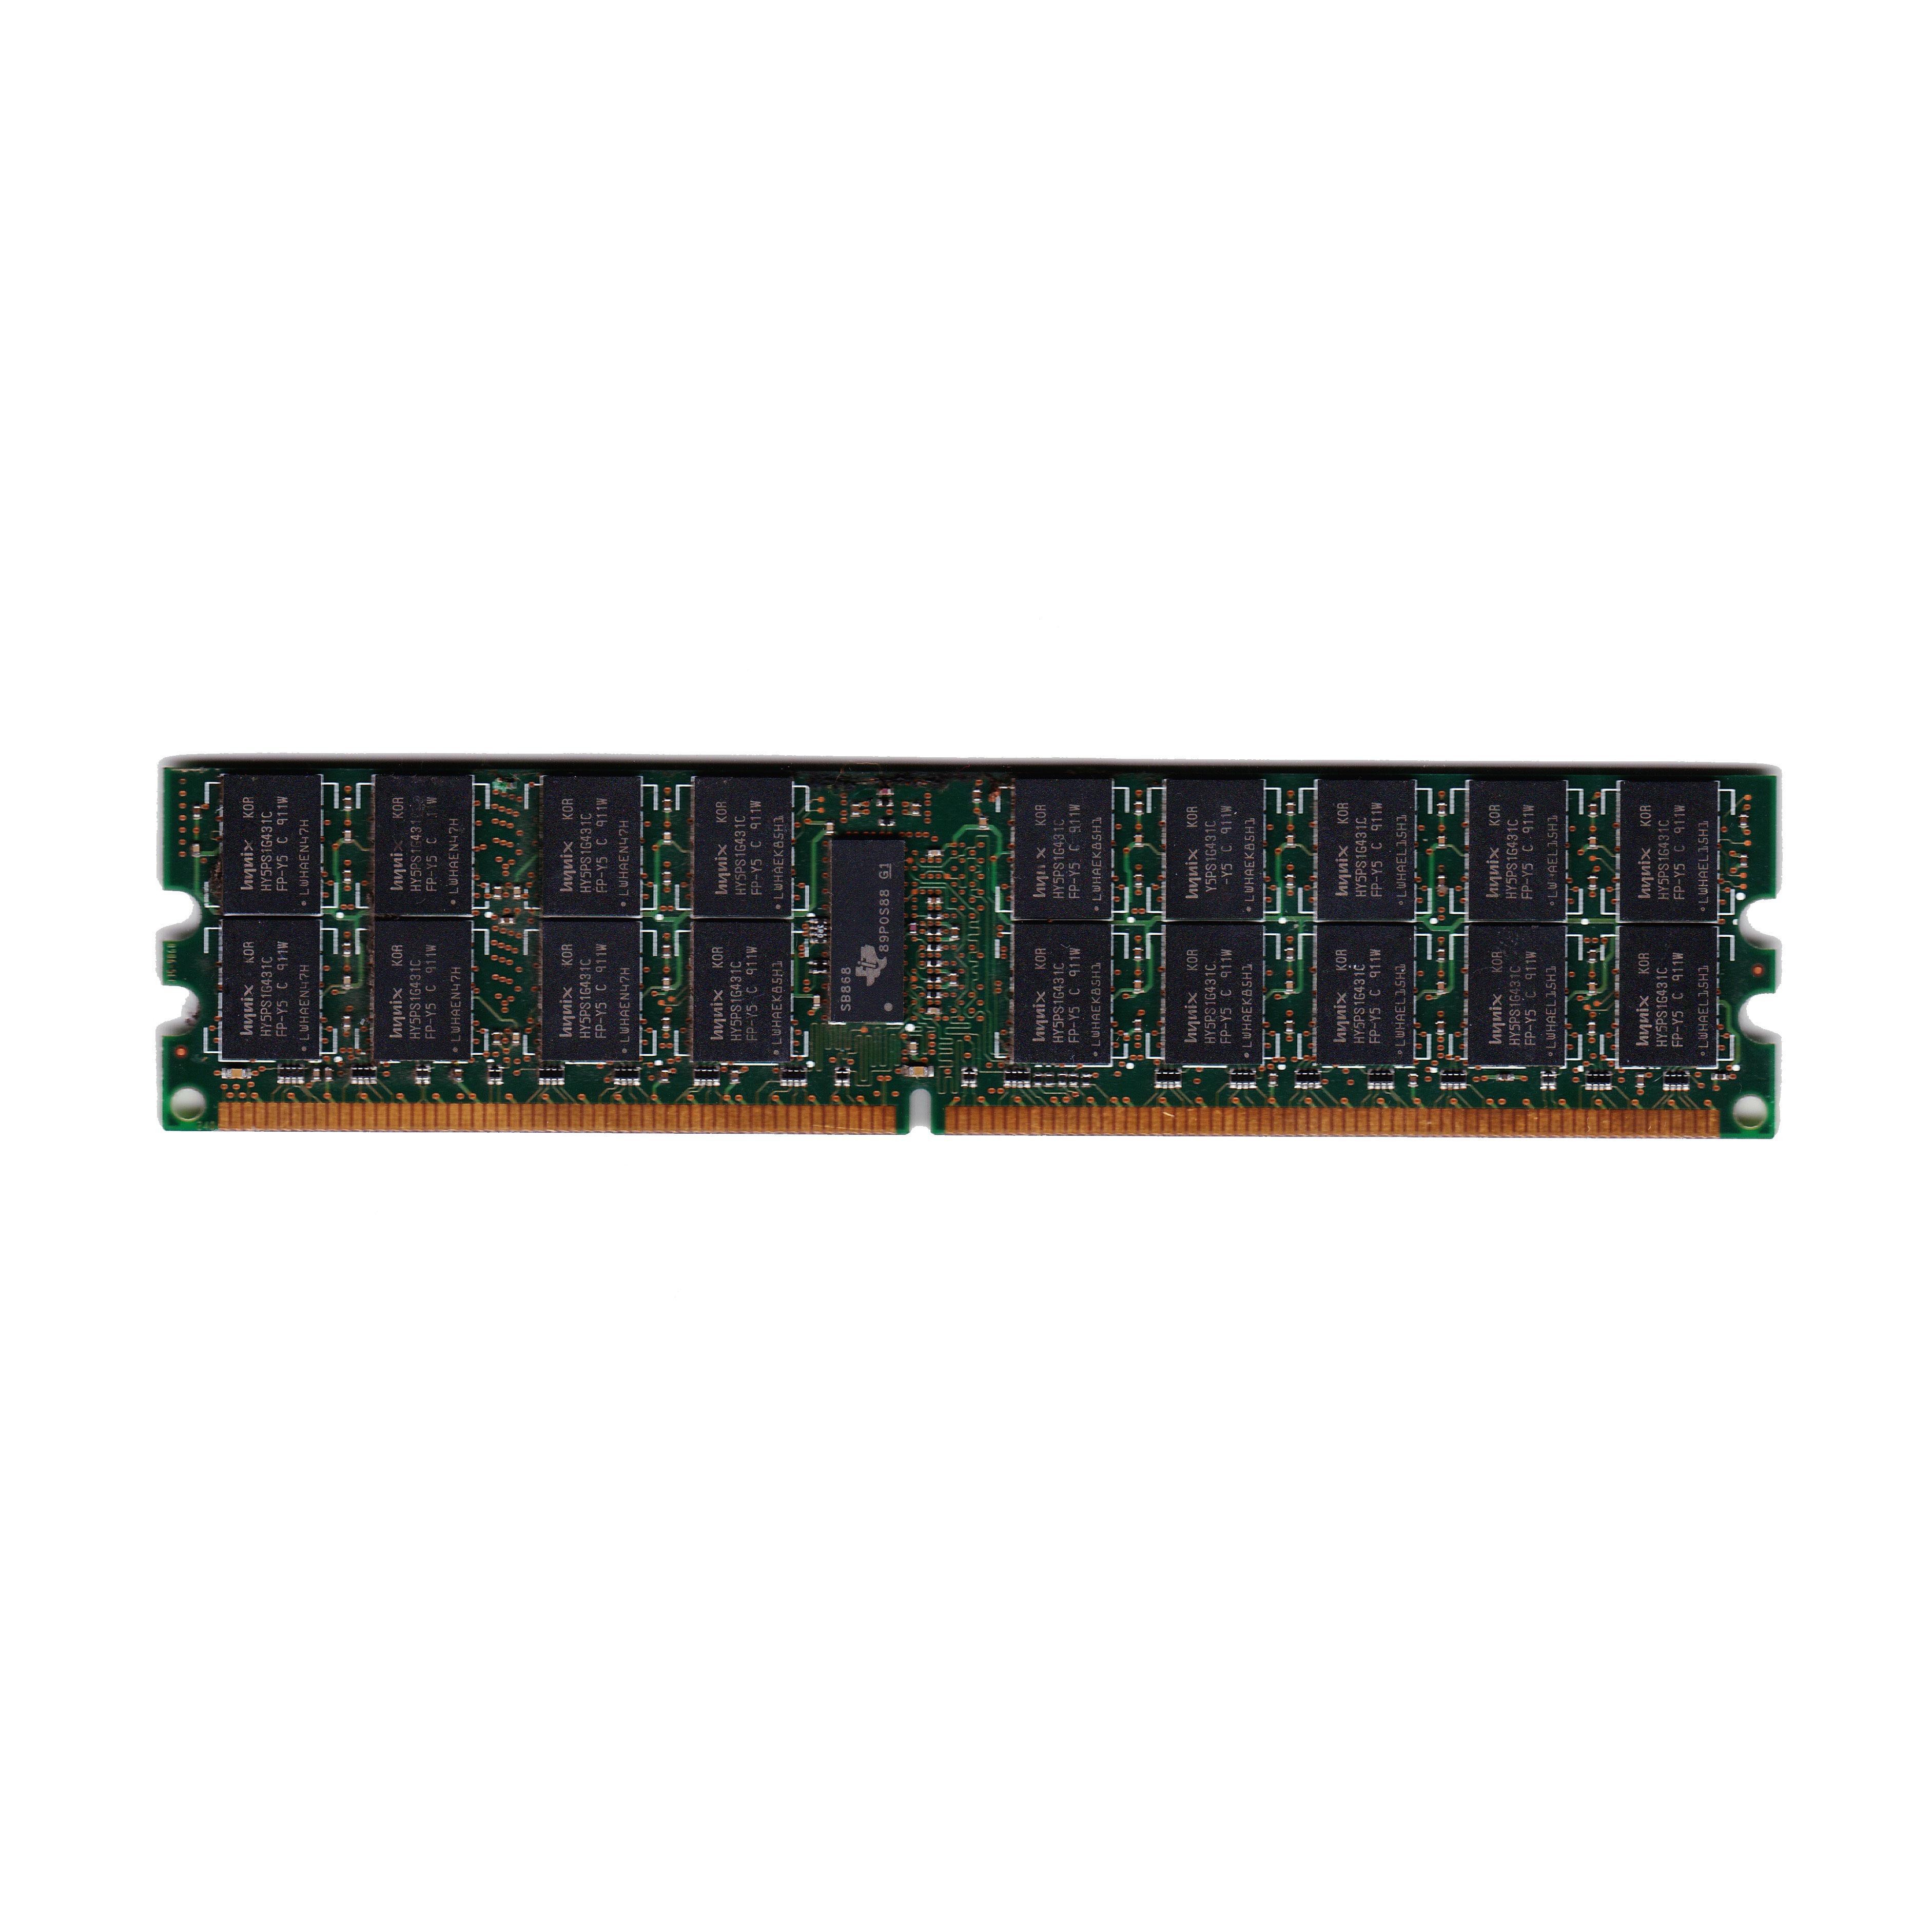 Preowned HYNIX 4GB 2Rx4 PC2 5300P 555 12 RAM (Untested)